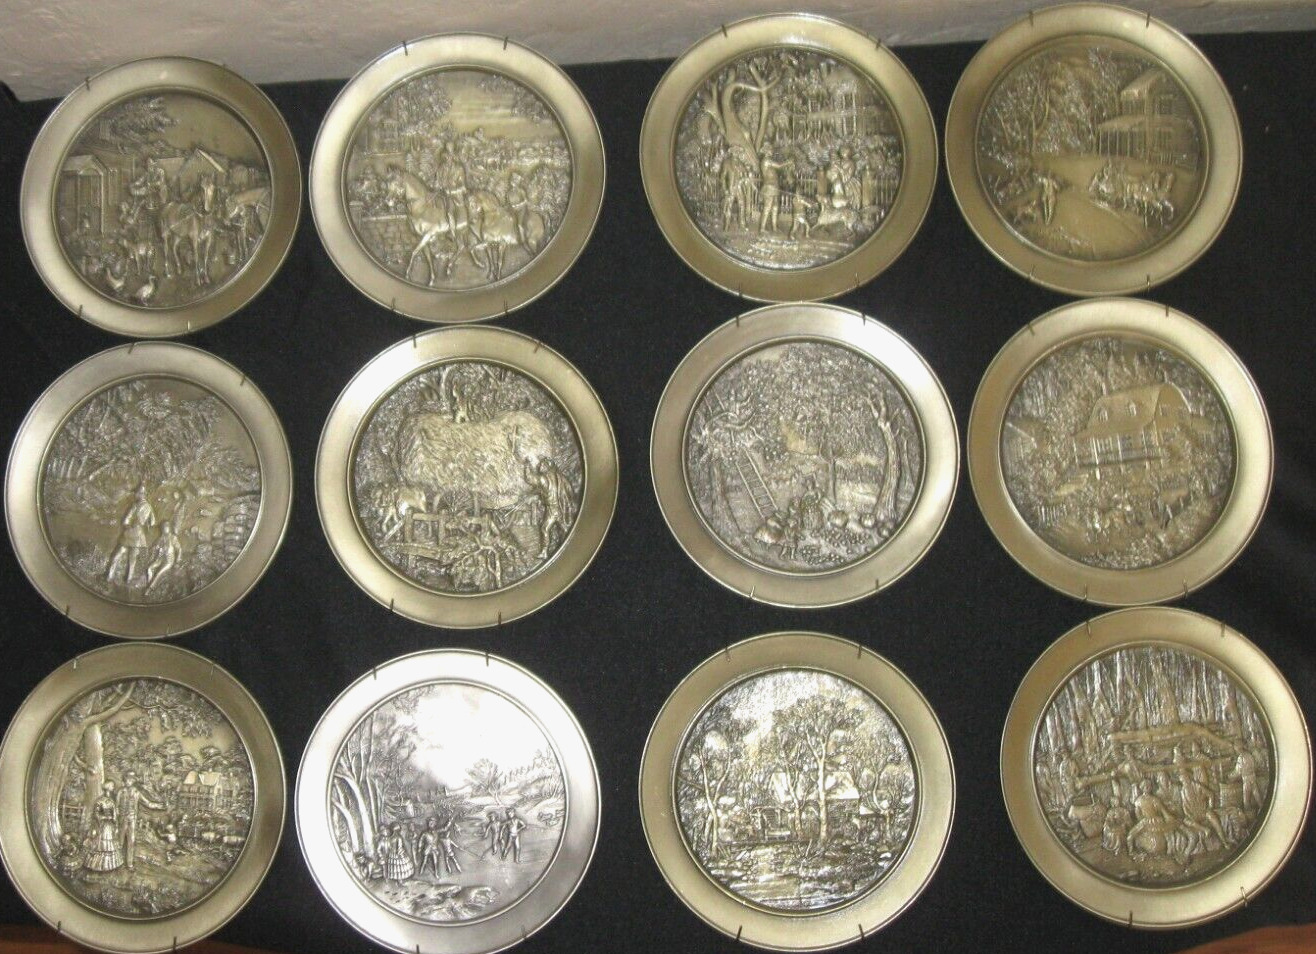 Vintage 1977 Currier & Ives Pewter Collectors Plates Full Set 12 Beautiful Art